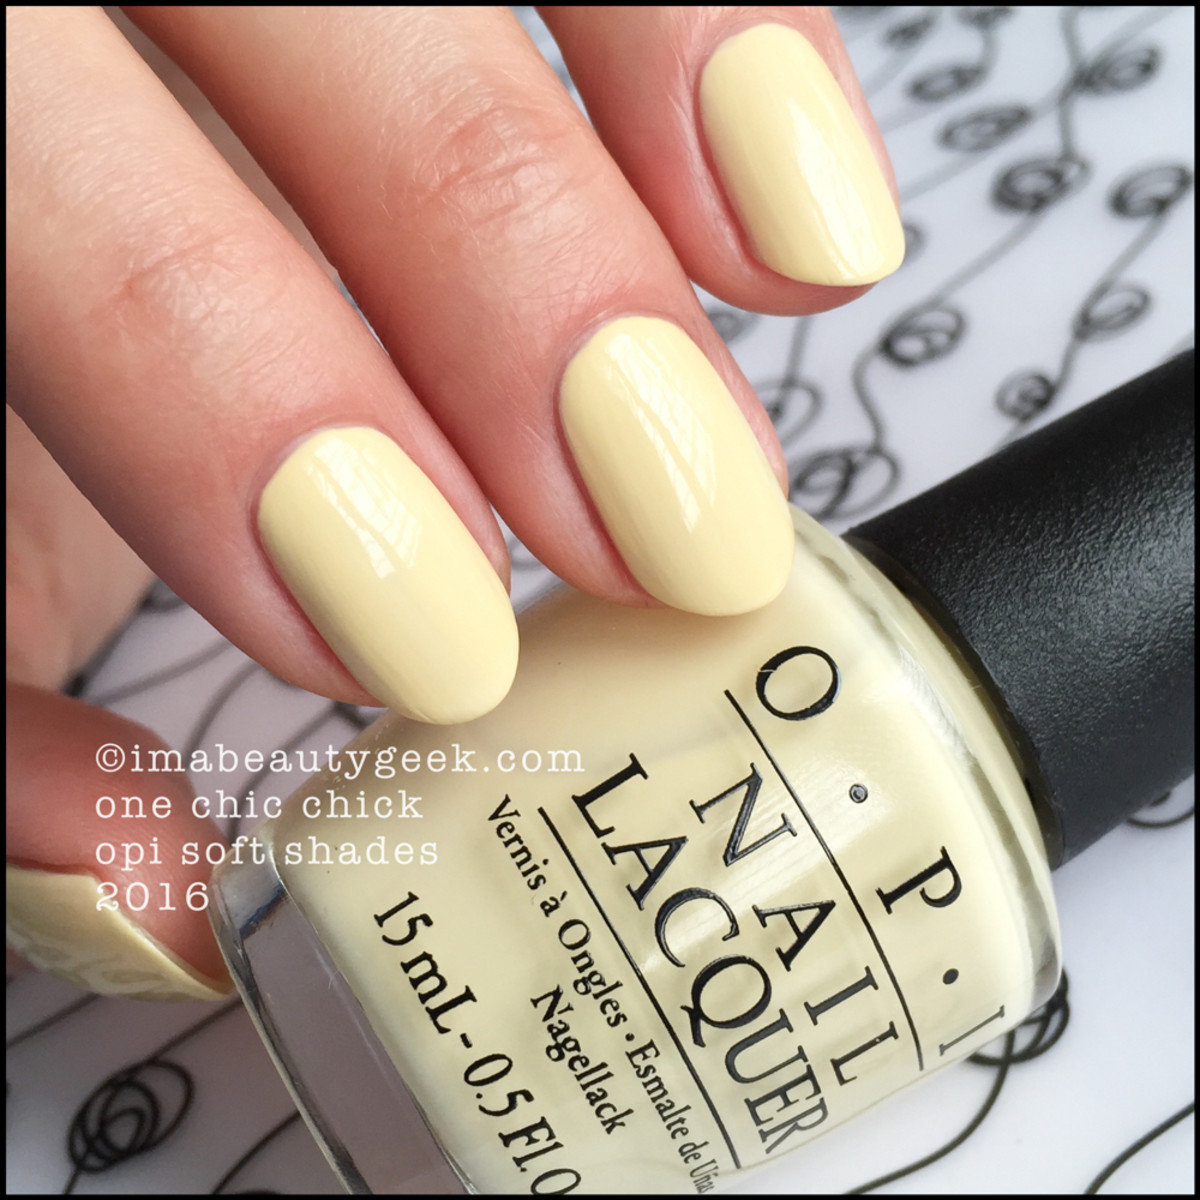 OPI One Chic Chick_OPI Soft Shades 2016 Pastels Swatches